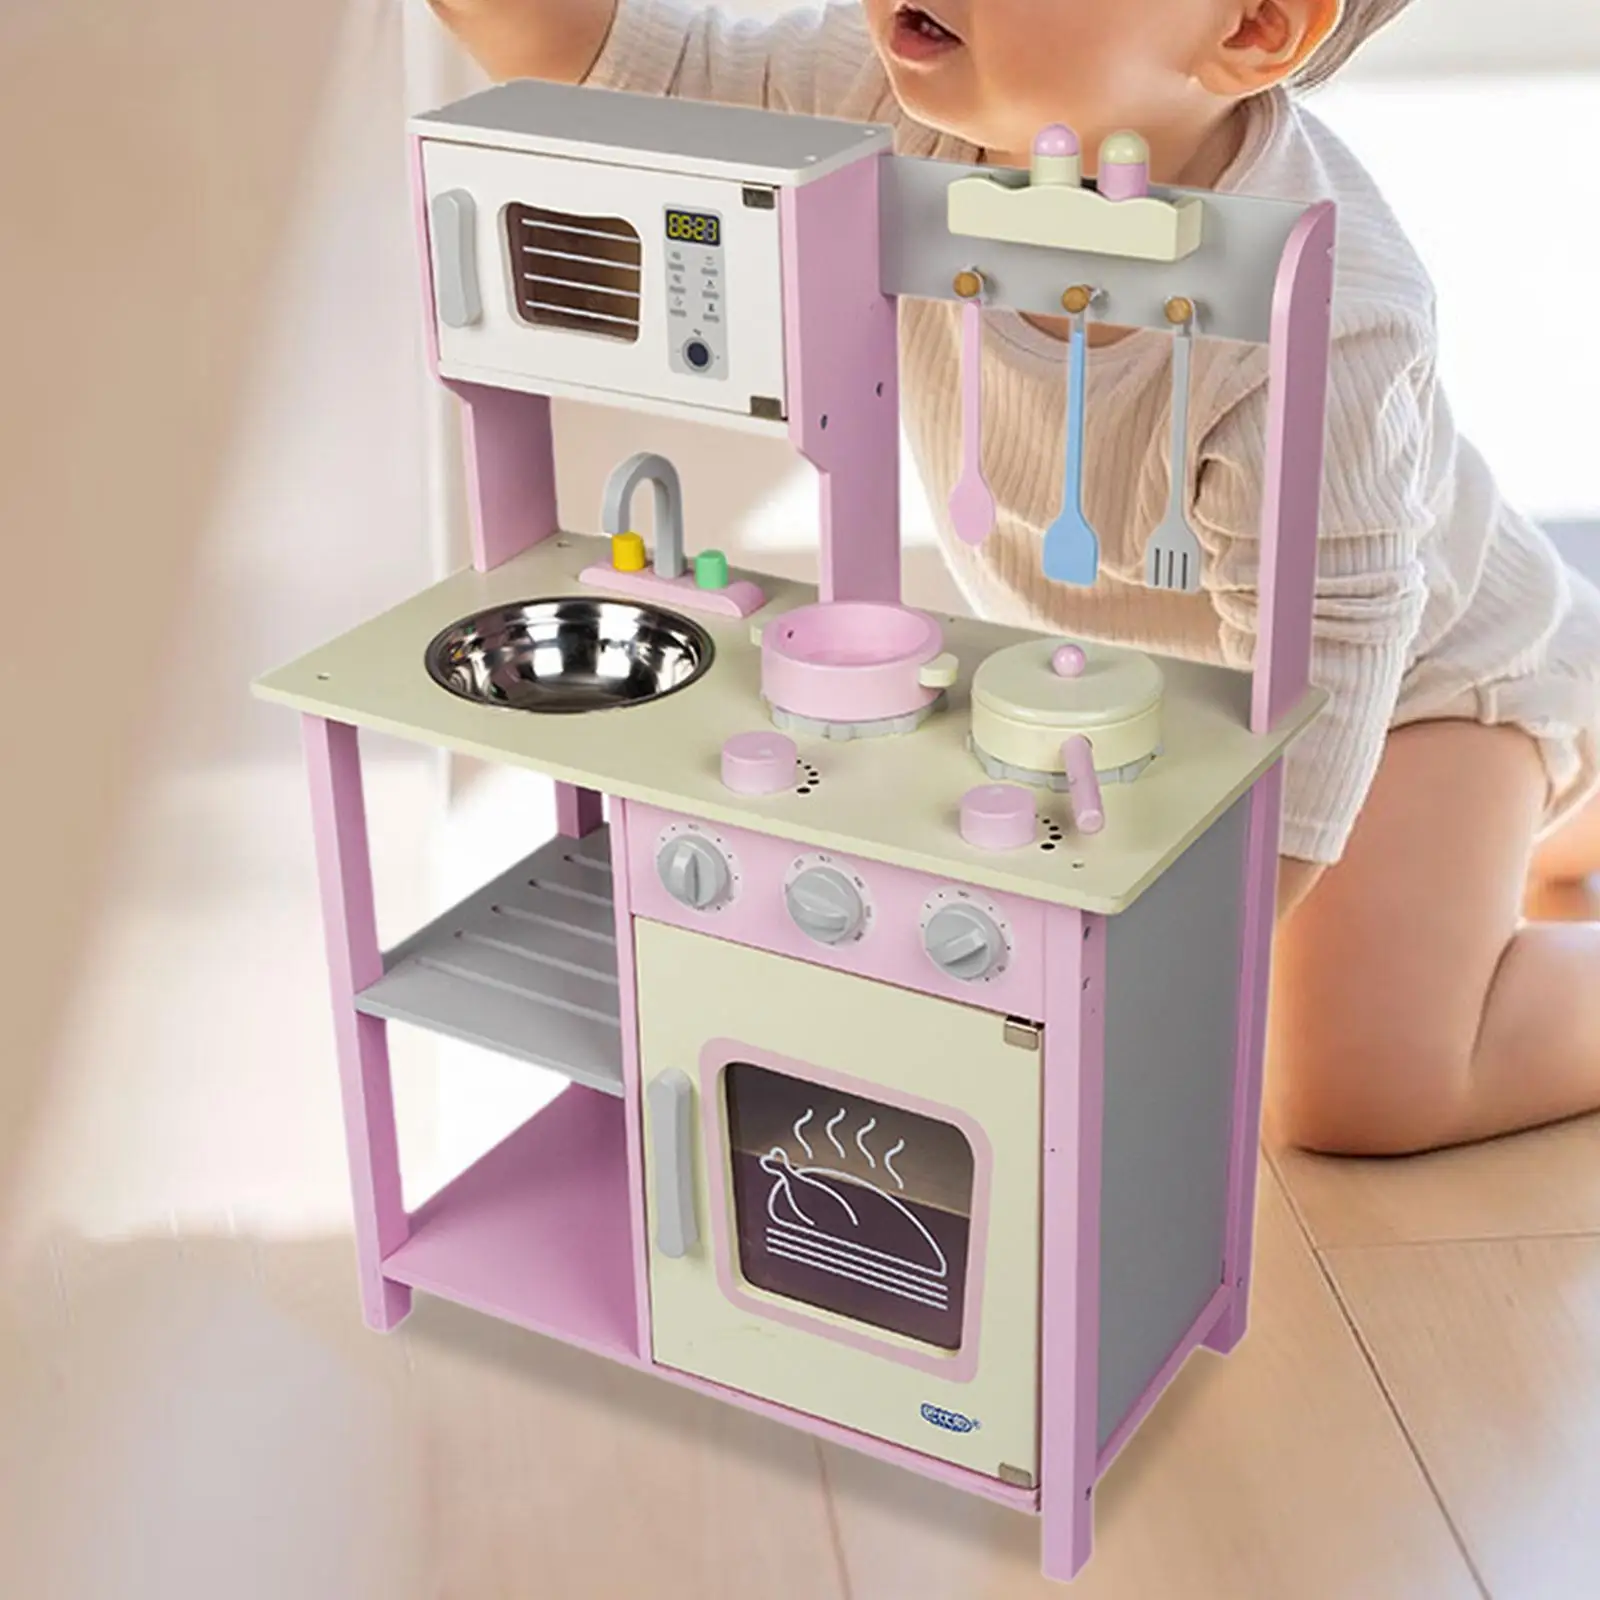 

Kitchen Playset Toy Utensils Accessories Learning Skill Toy Cooking Oven for Ages 4-6 Kids Preschool Boys Girls Birthday Gifts